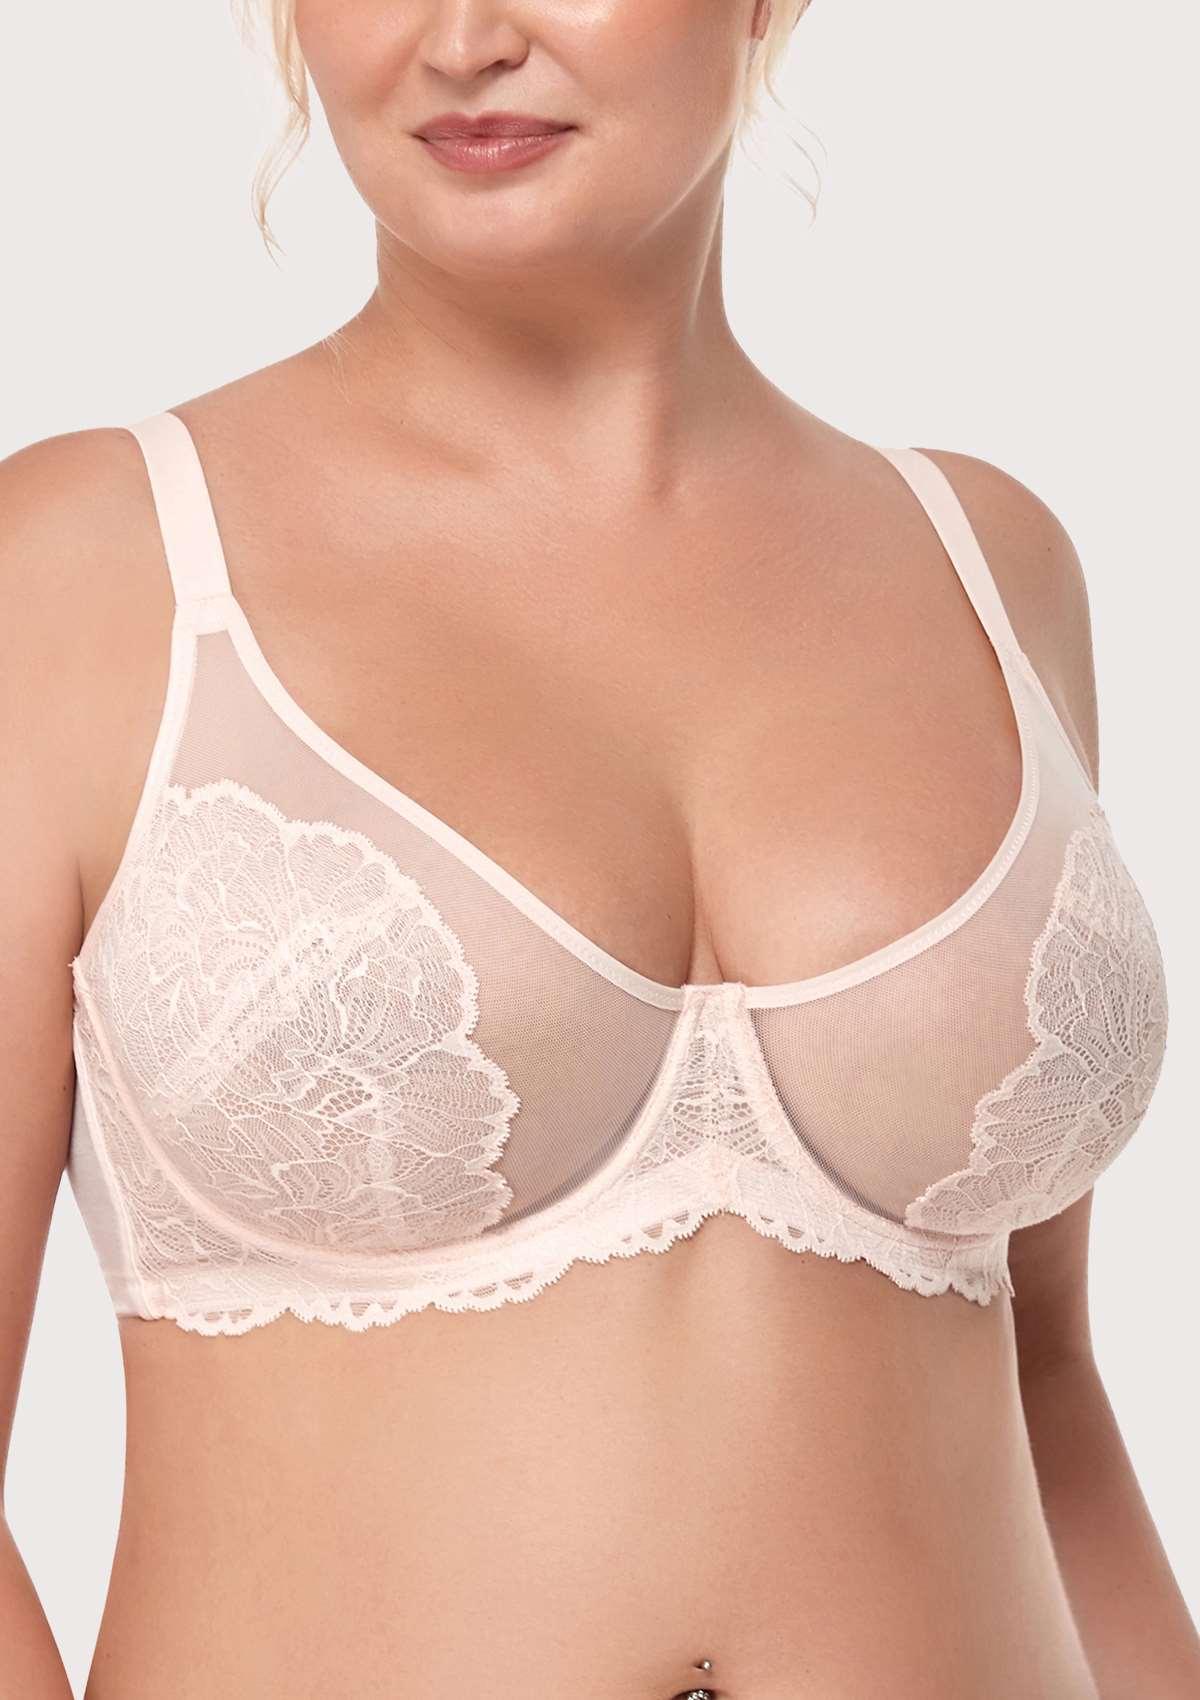 HSIA Blossom Matching Lacey Underwear And Bra Set: Sexy Lace Bra - Dusty Peach / 40 / G